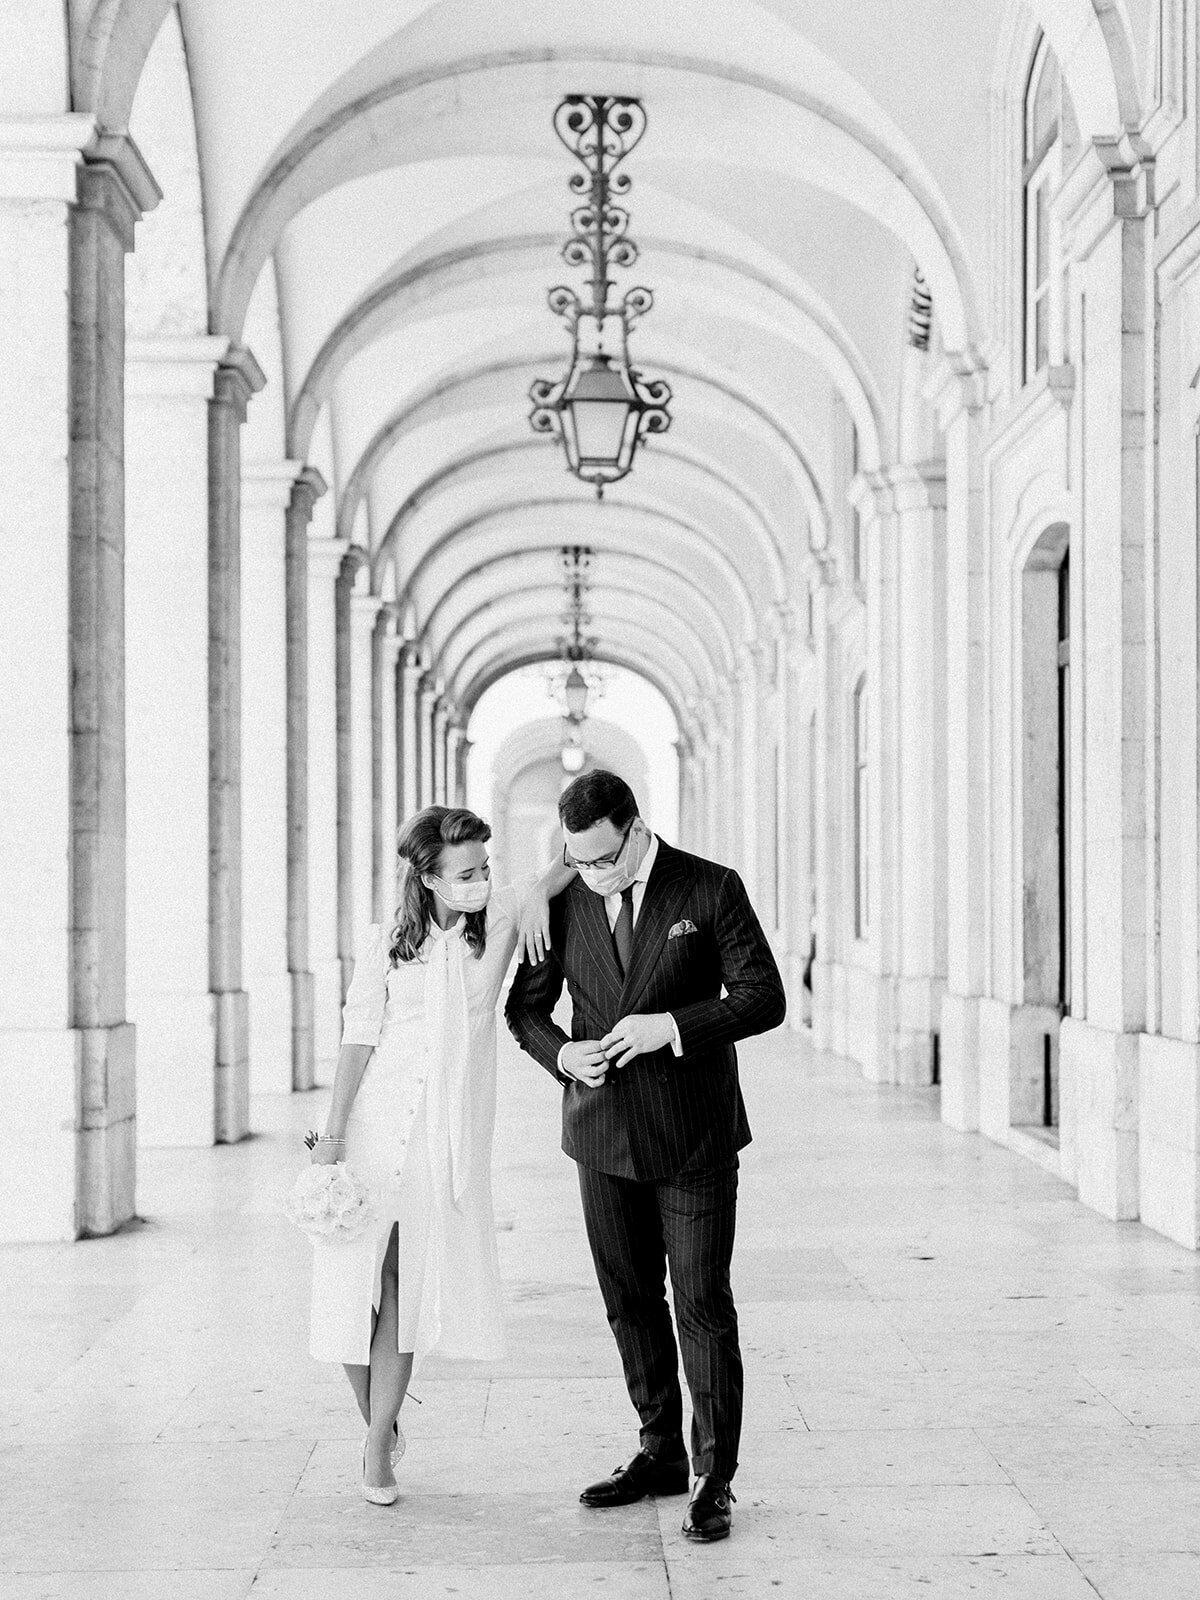 Civil Wedding During Covid Times in LIsbon, Portugal